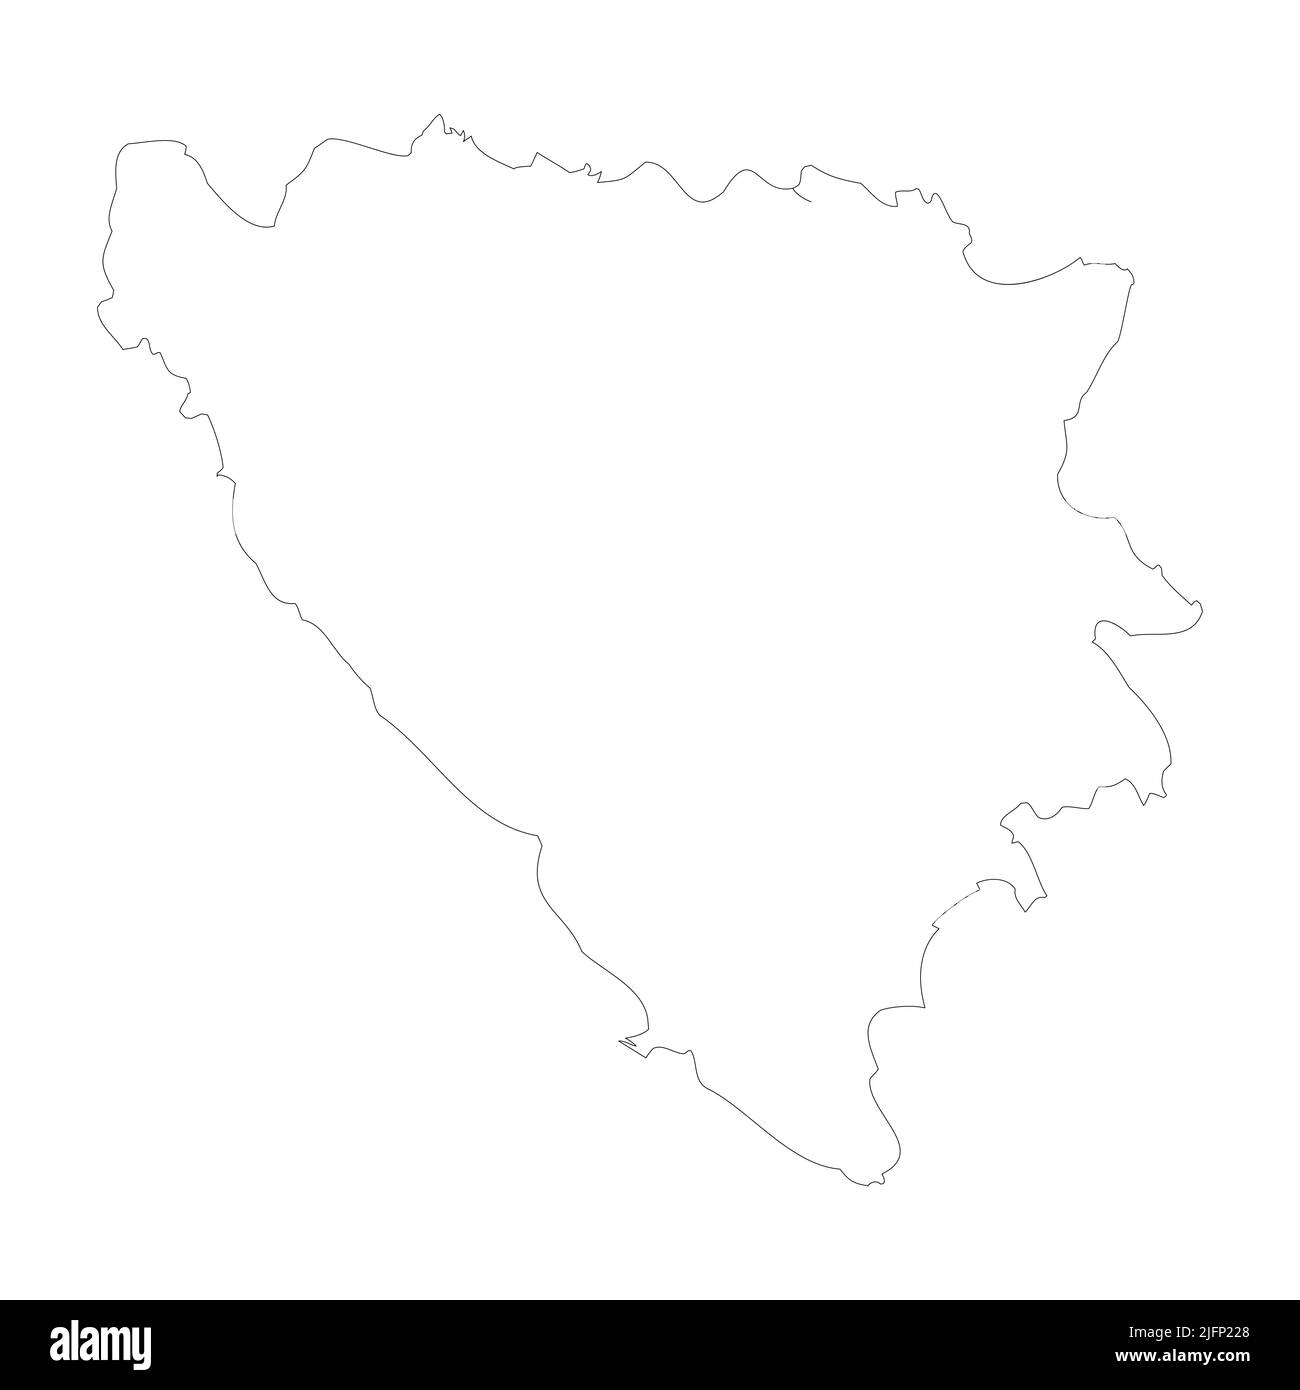 Bosnia and Herzegovina vector country map outline Stock Vector